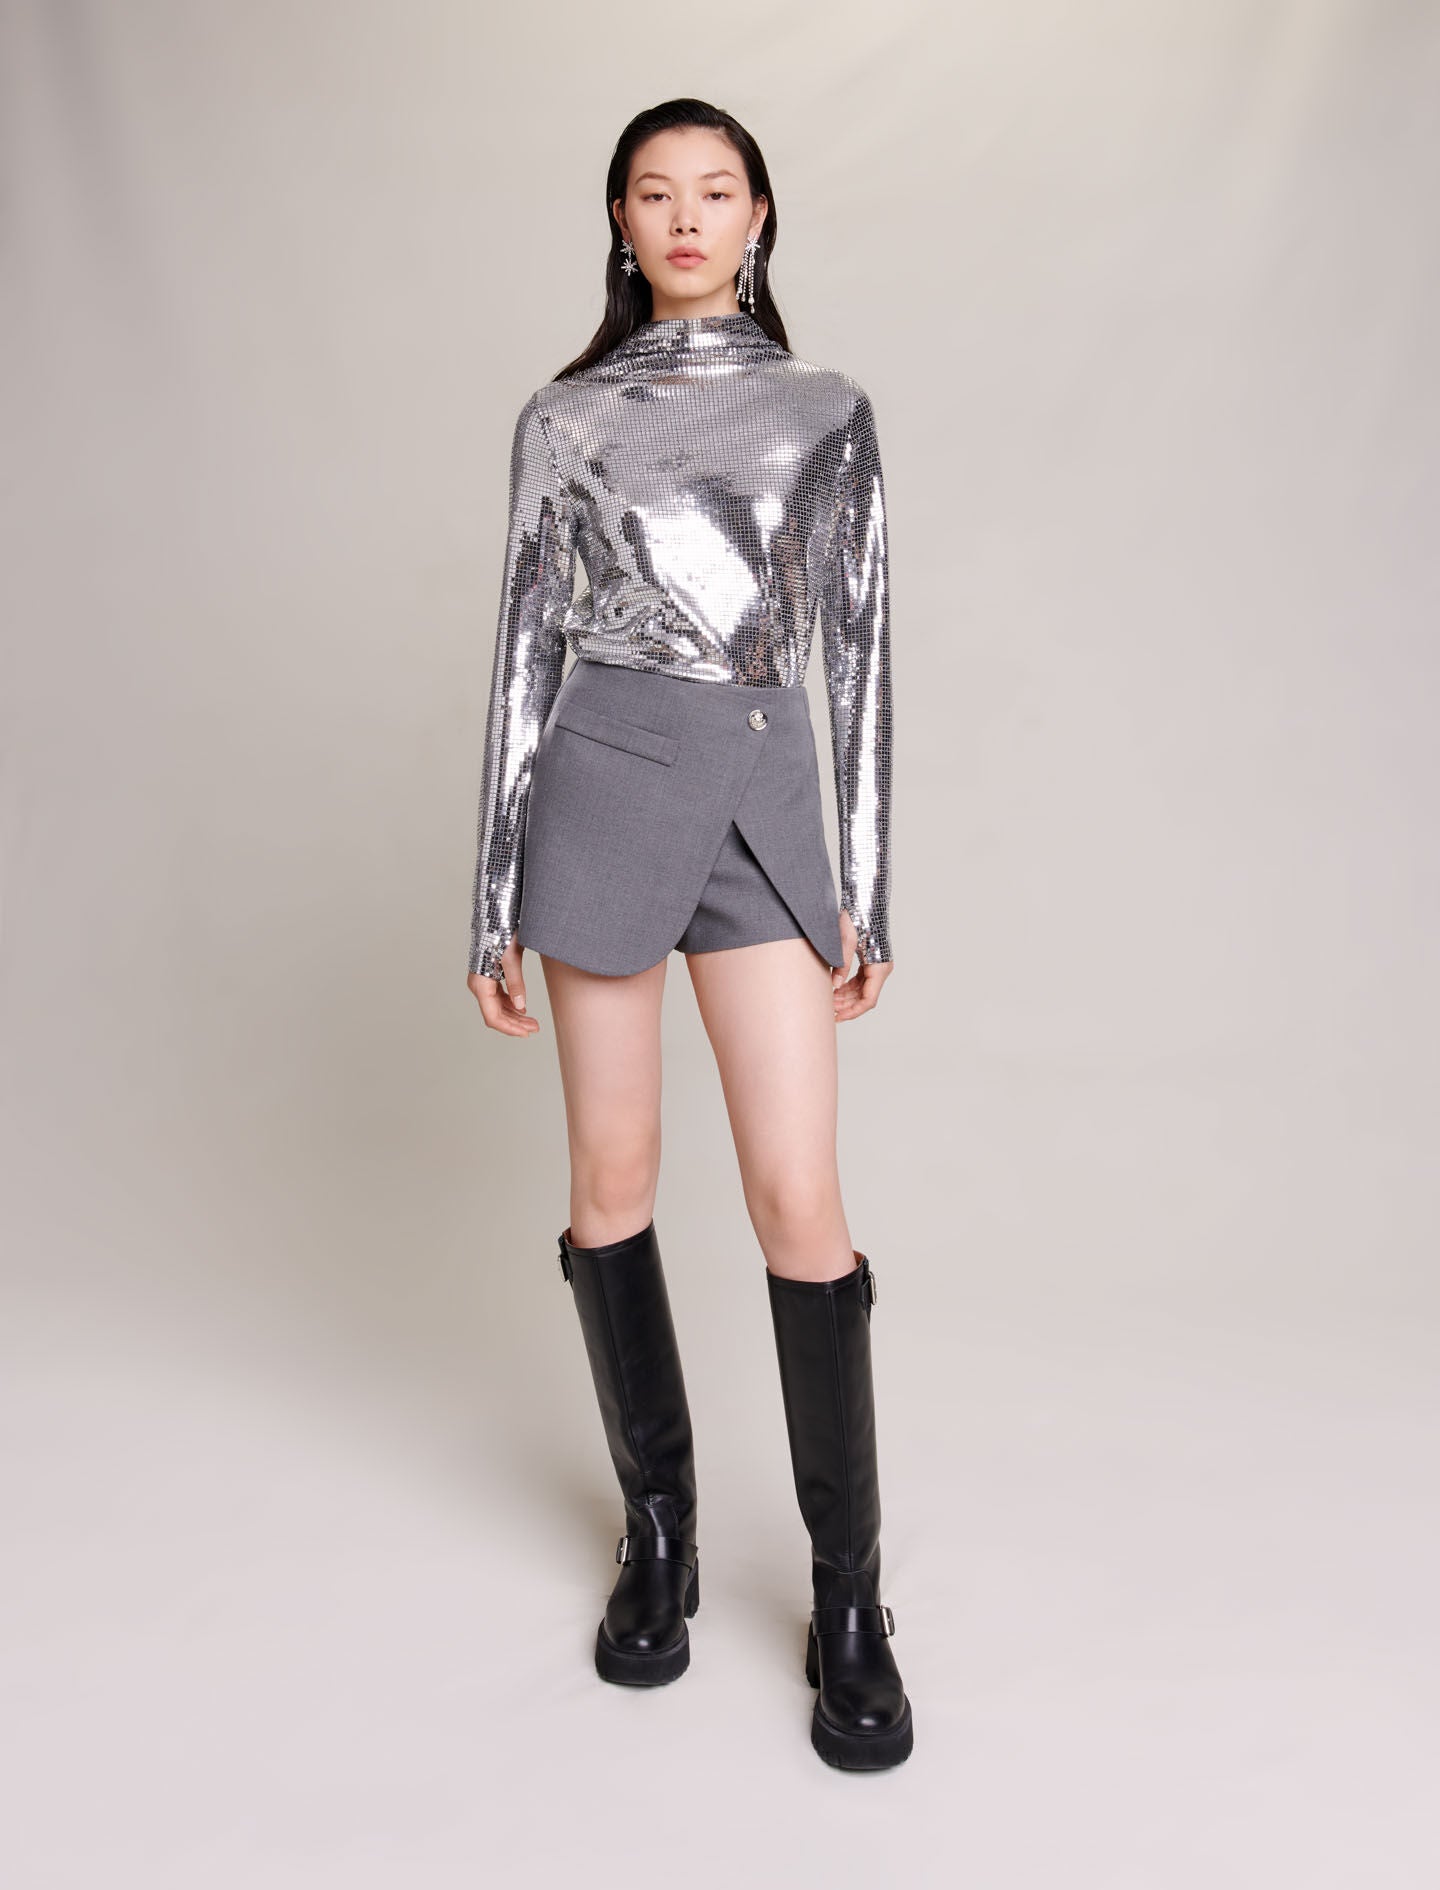 Silver-featured-glittery top